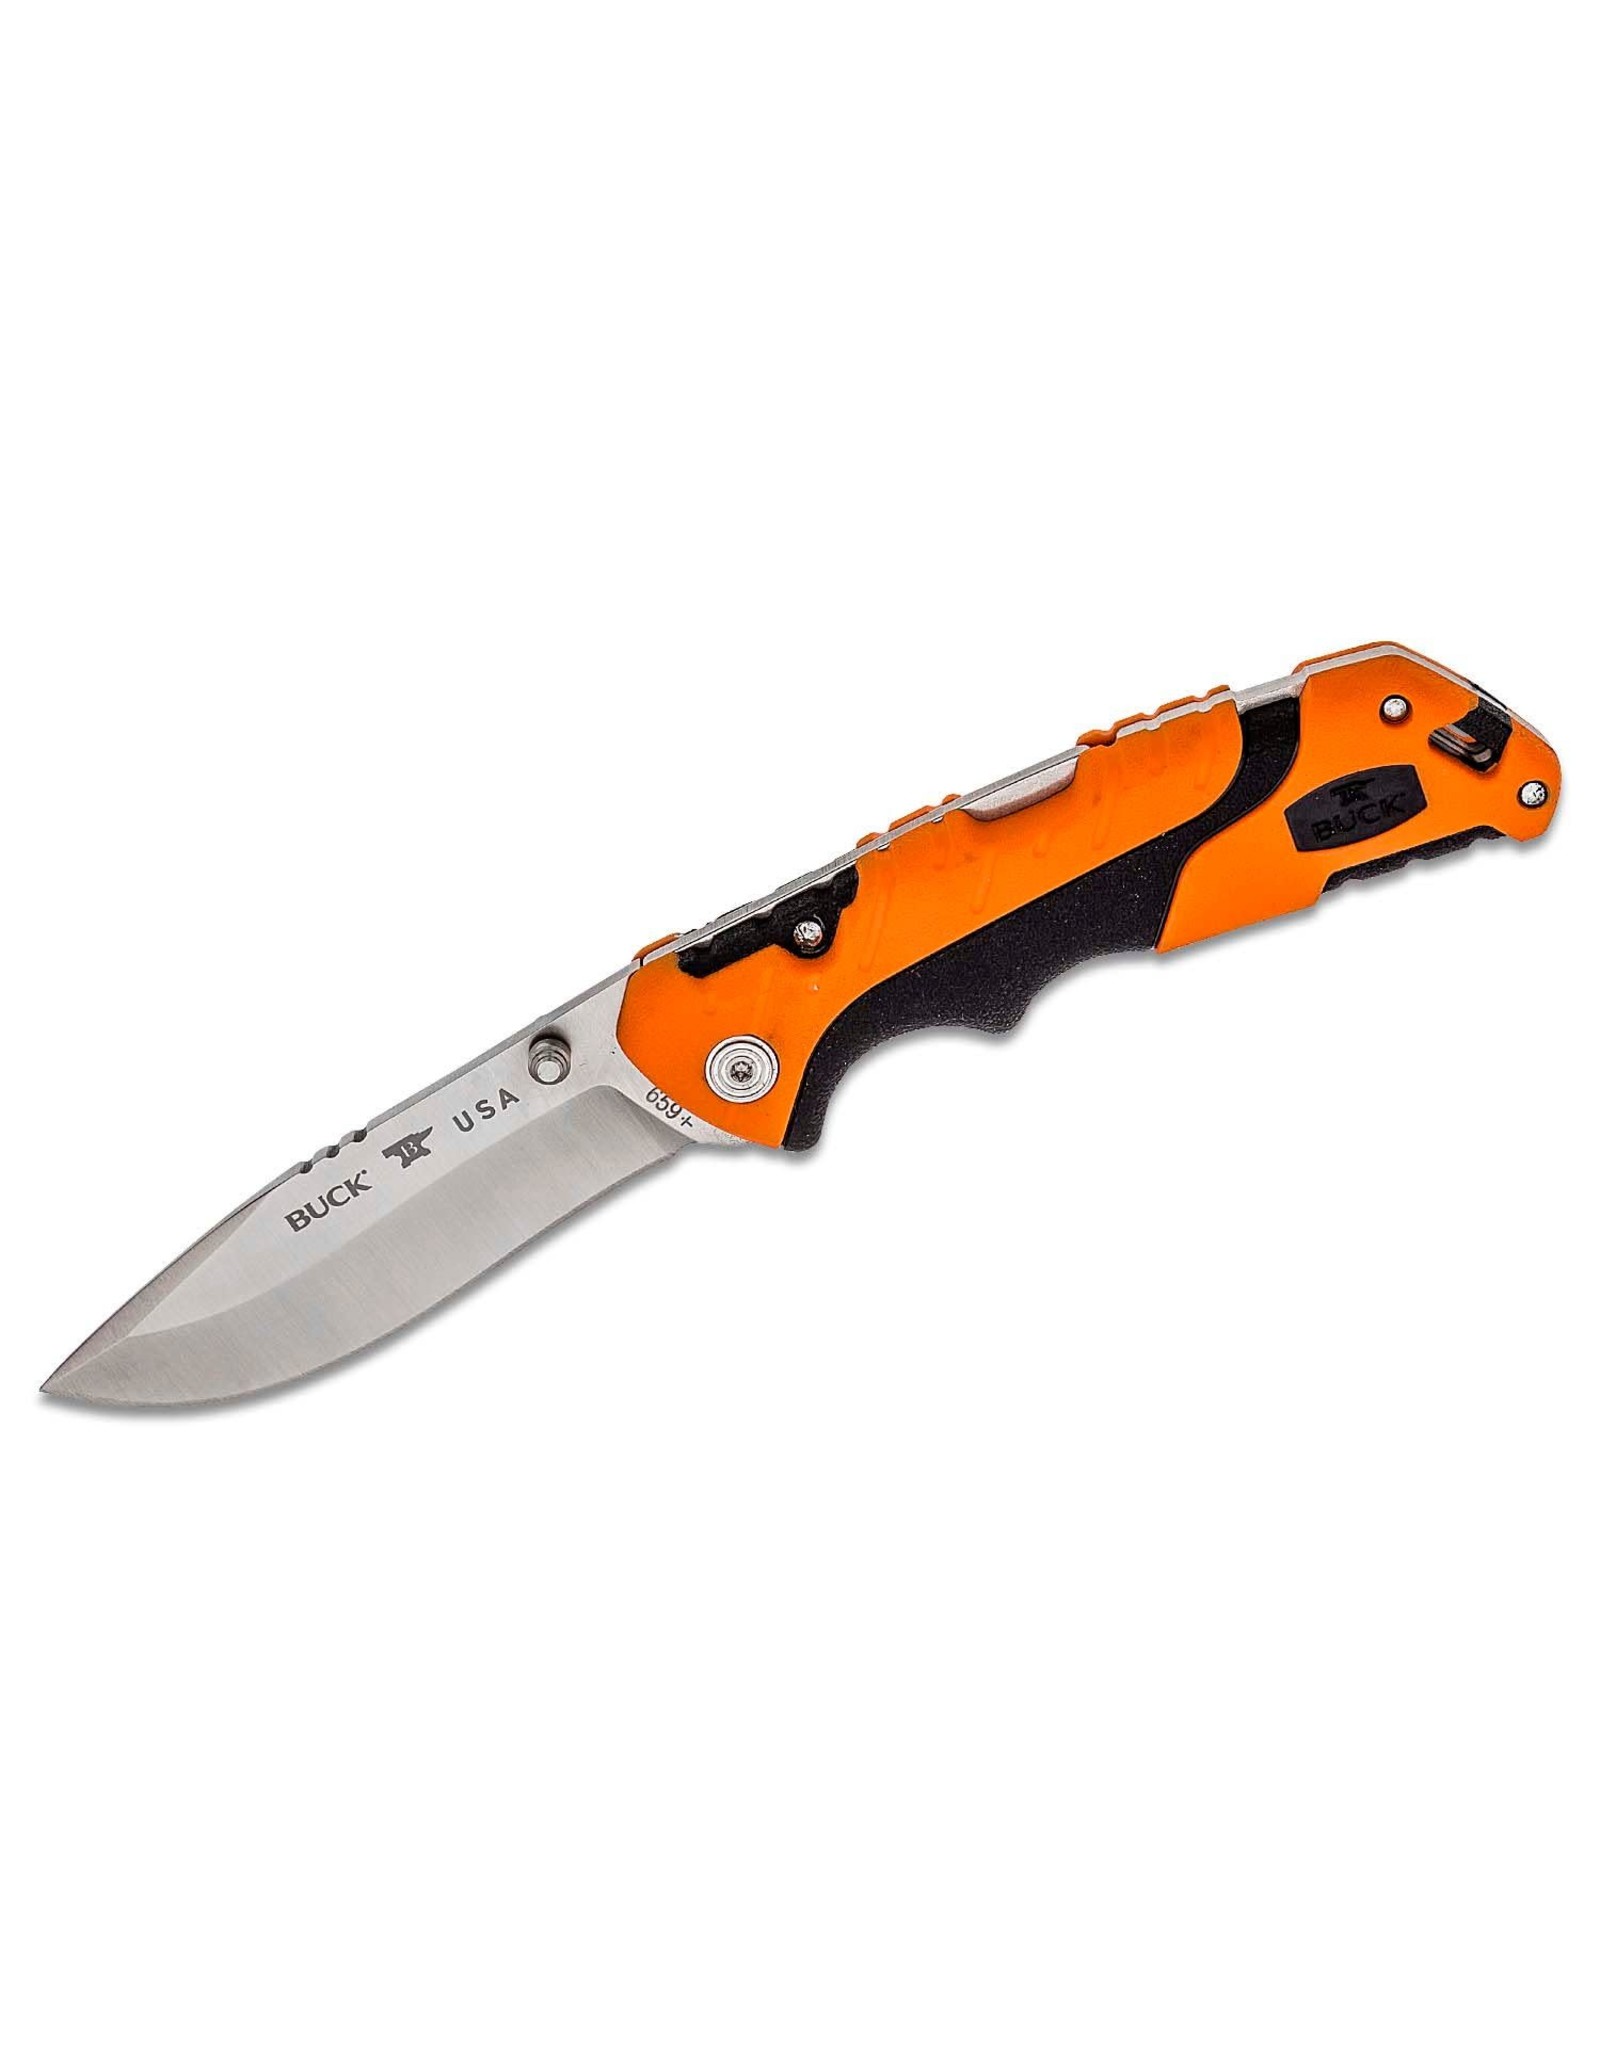 Buck Knives Buck 659 Large Pursuit Pro Folding Knife 3.625" S35VN Stainless Steel Drop Point, Orange GRN and Rubber Handles, Polyester Sheath - 12754